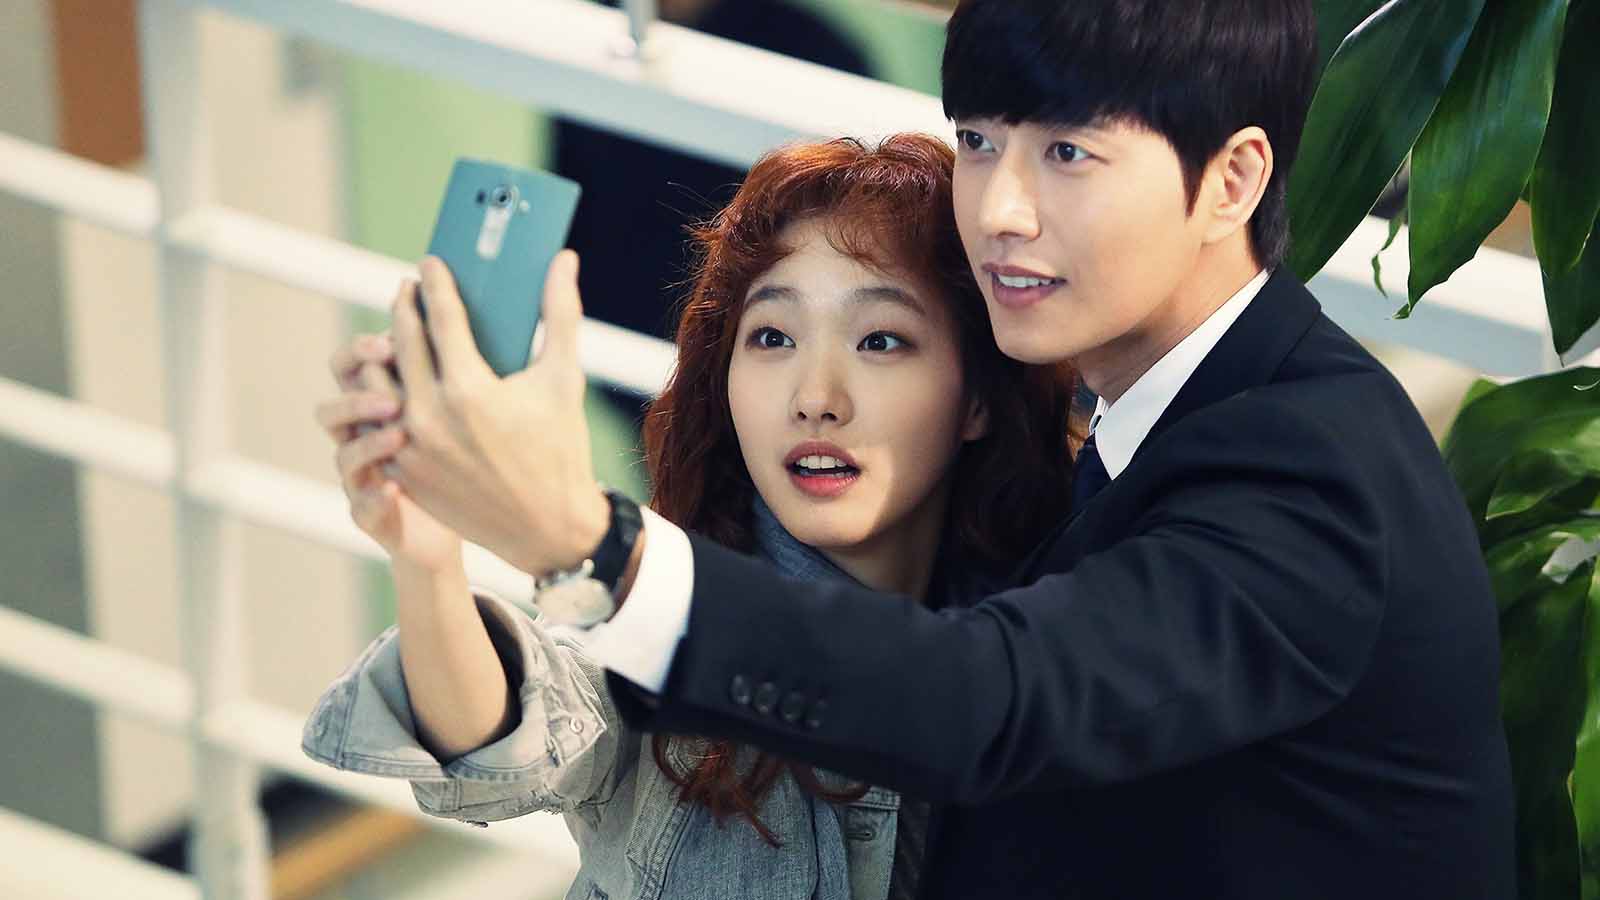 K Drama 'Cheese In The Trap': A Romance Everyone Should Watch